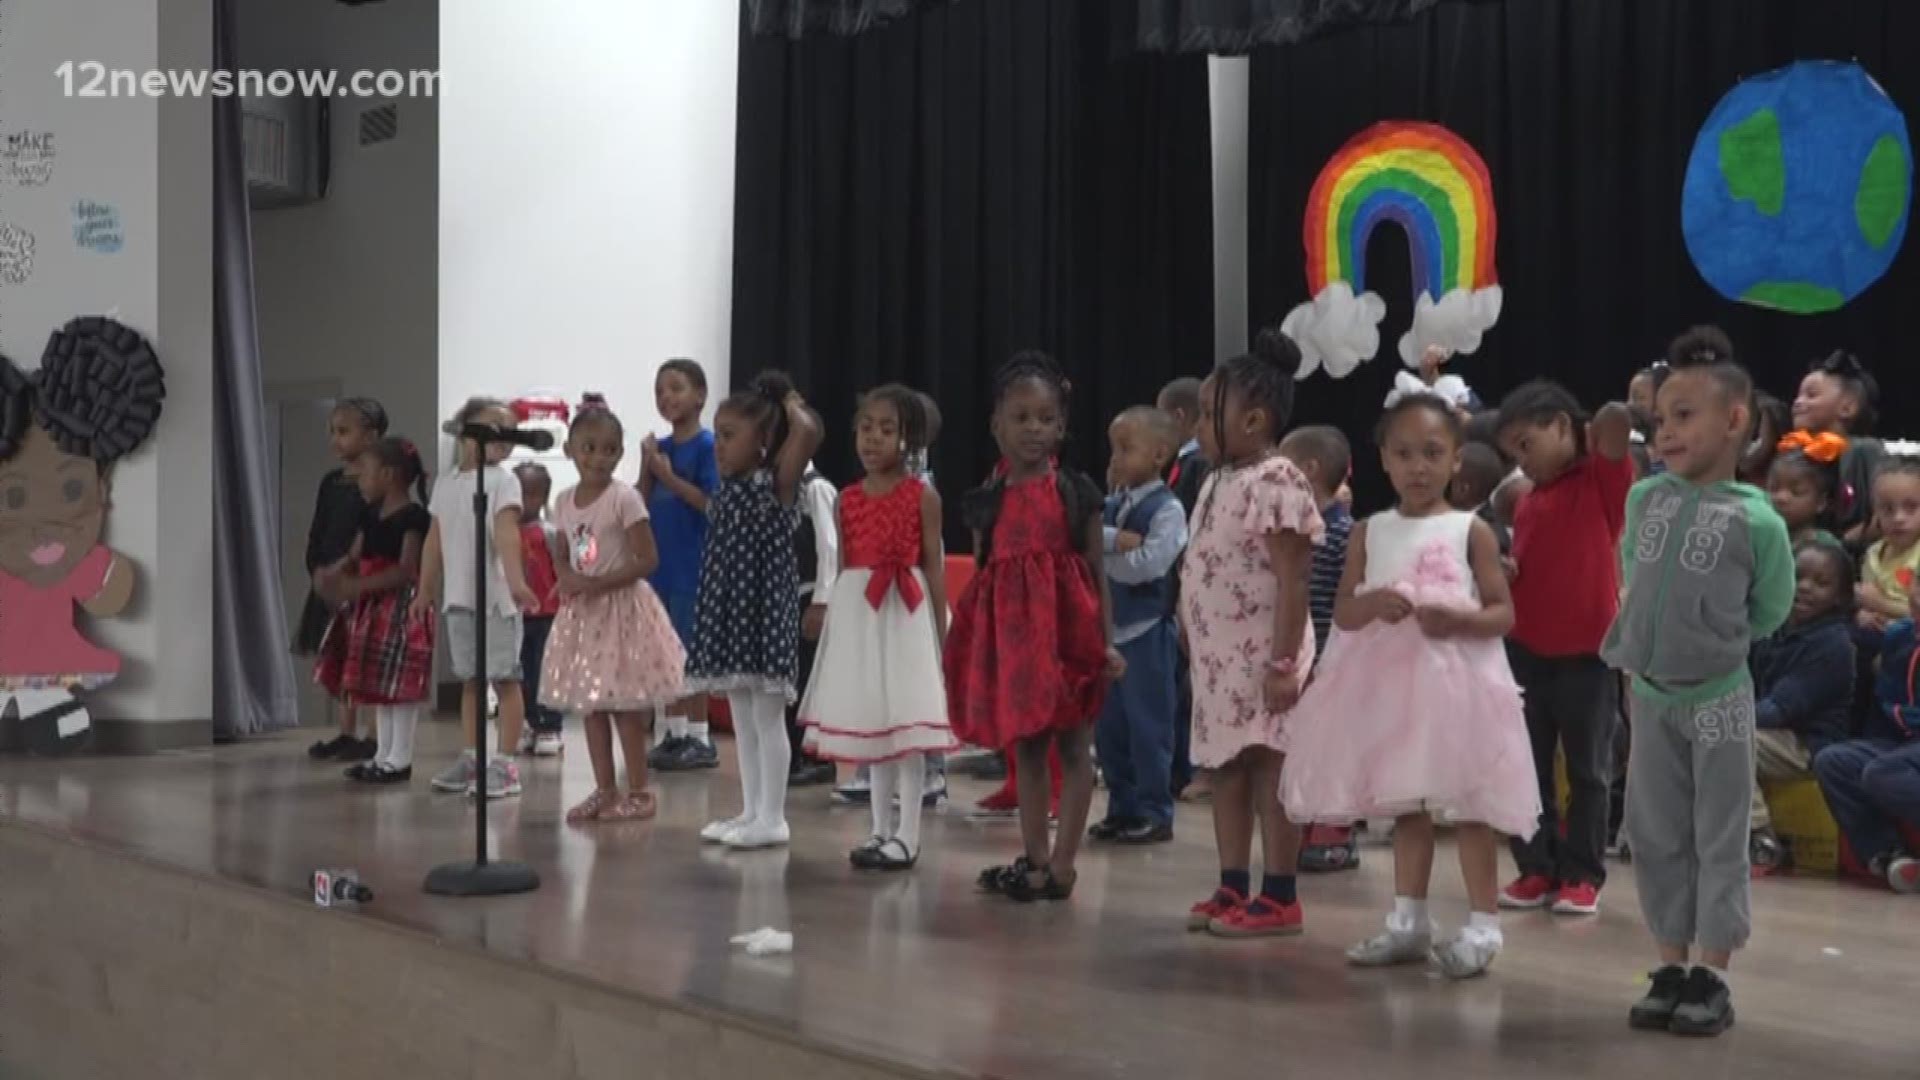 One Bingman preschool student stole the show with his impersonation of Dr. King.